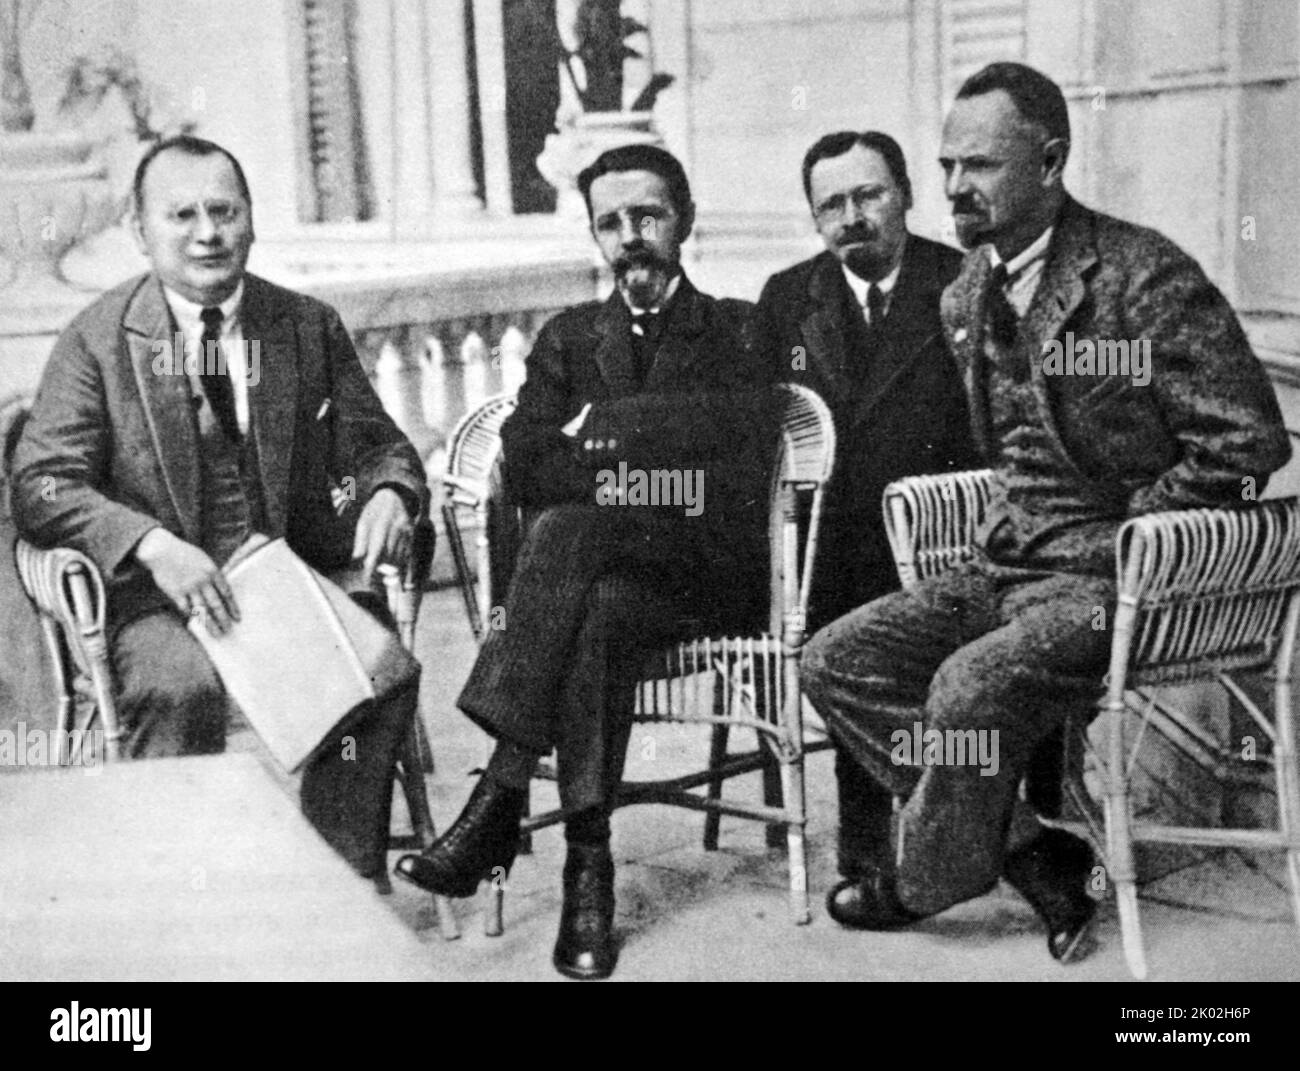 A group of Soviet delegates at an international conference in Genoa. 1922. From left to right: M.M. Litvinov, V.V. Vorovsky, S.S. Pilyavsky (Assistant to the Deputy Peoples Commissar for Foreign Affairs), L.B. Krasin.&#13;&#10; Stock Photo